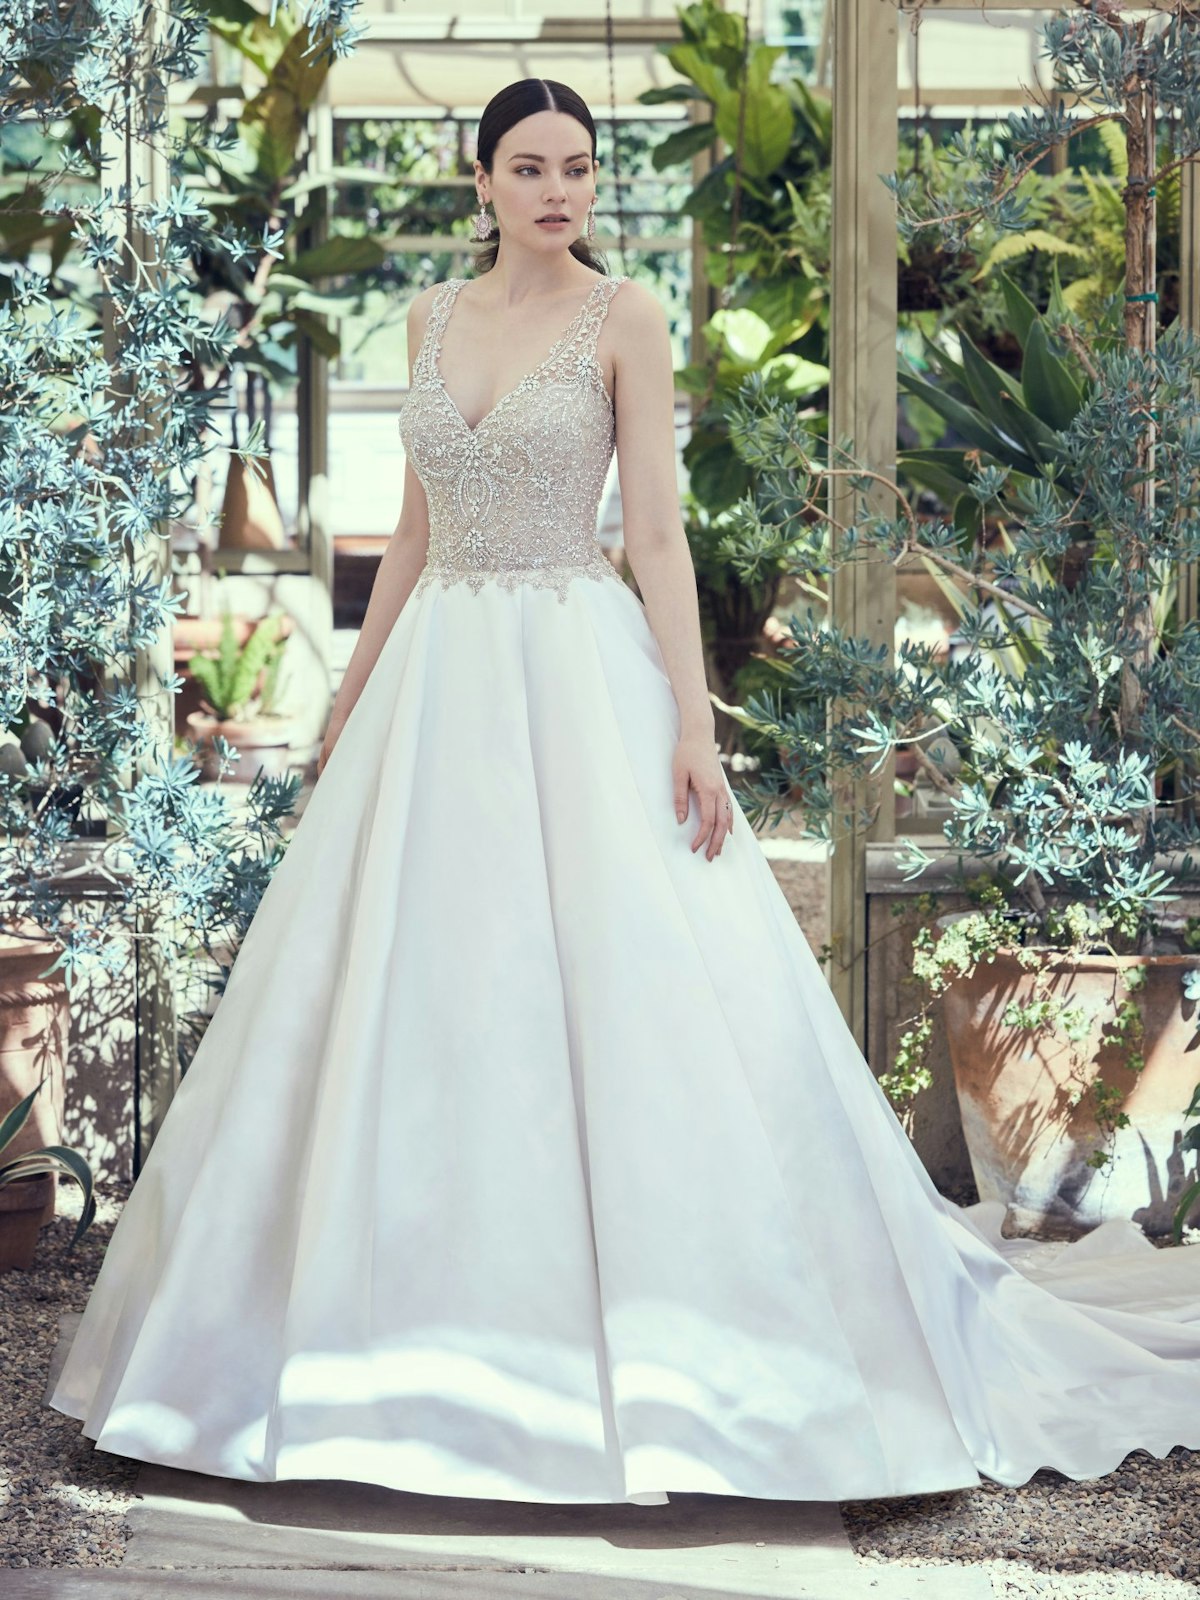 Sophronia Beaded Ball Gown Wedding Dress   Maggie Sottero